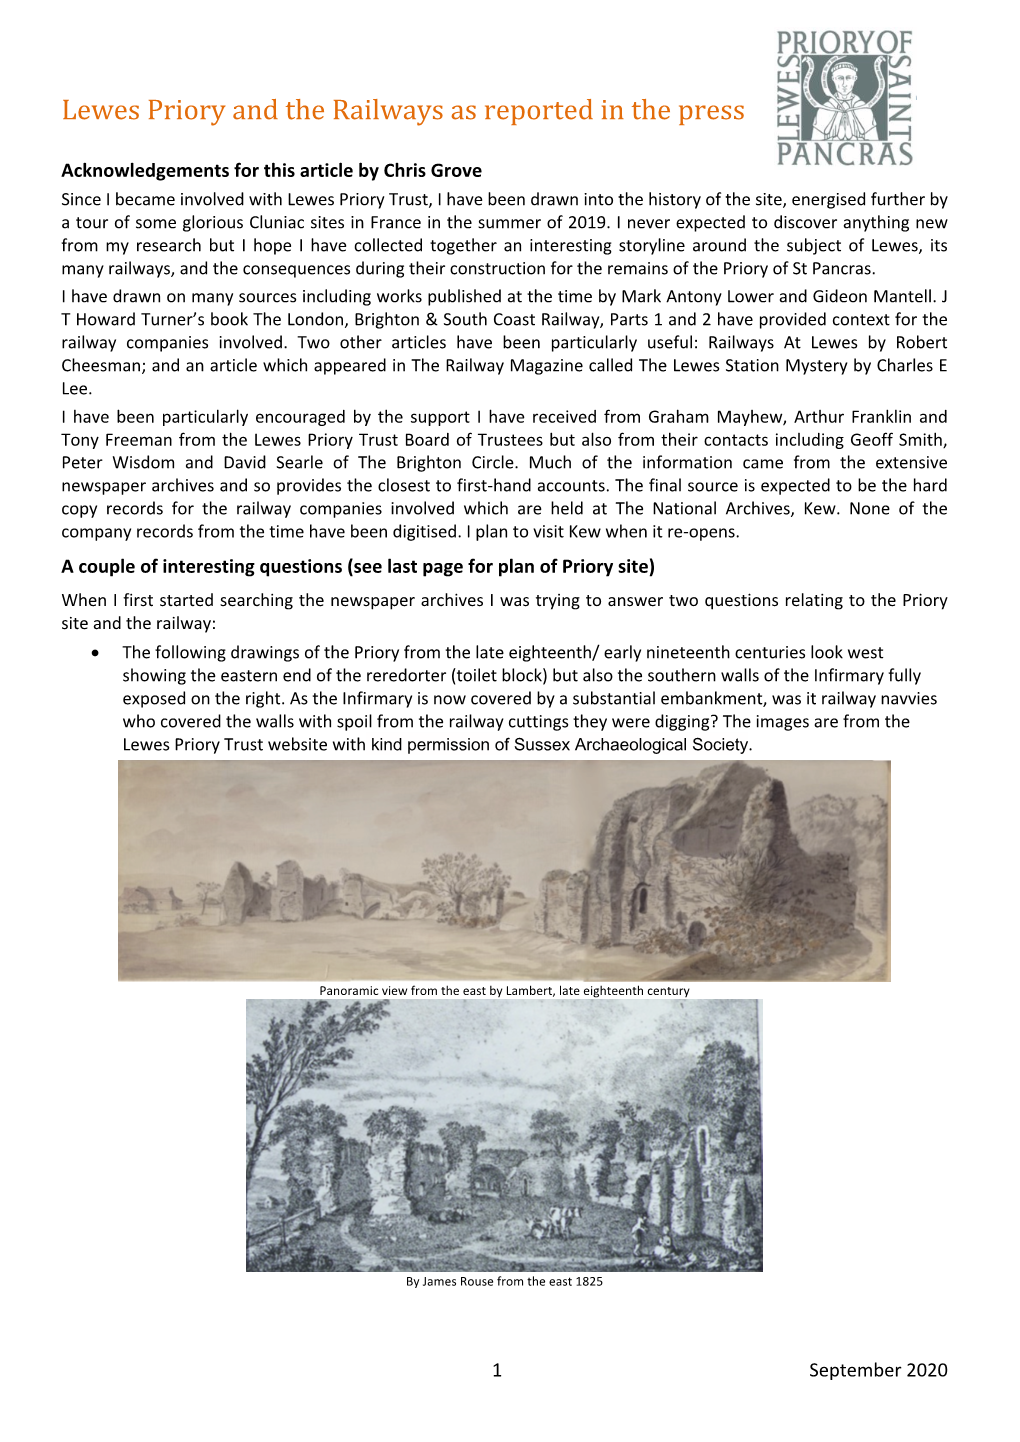 Lewes Priory and the Railways As Reported in the Press